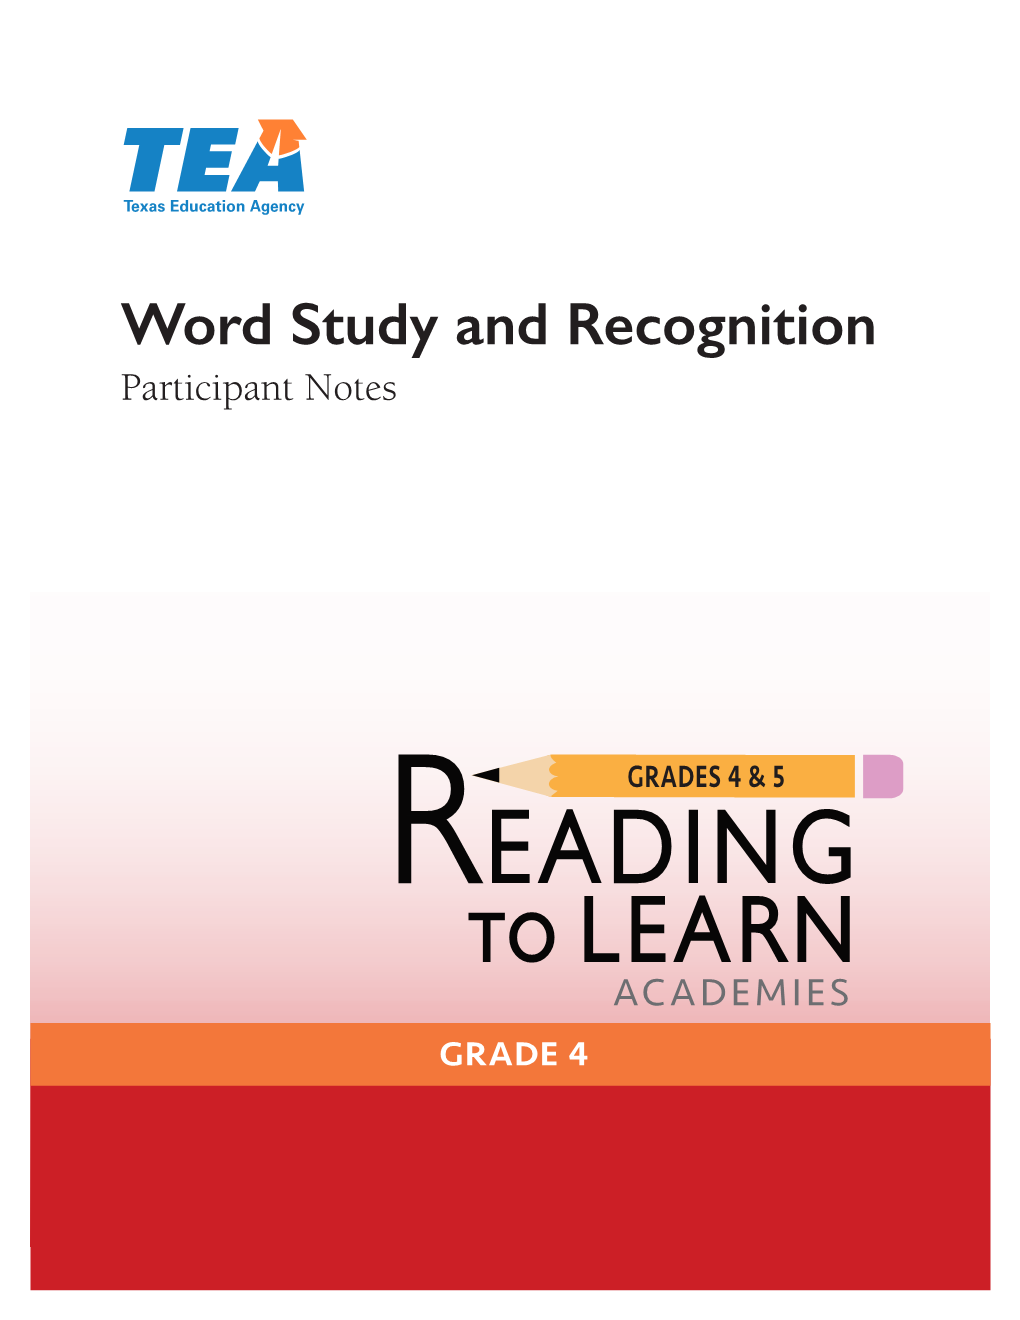 Word Study and Recognition Participant Notes